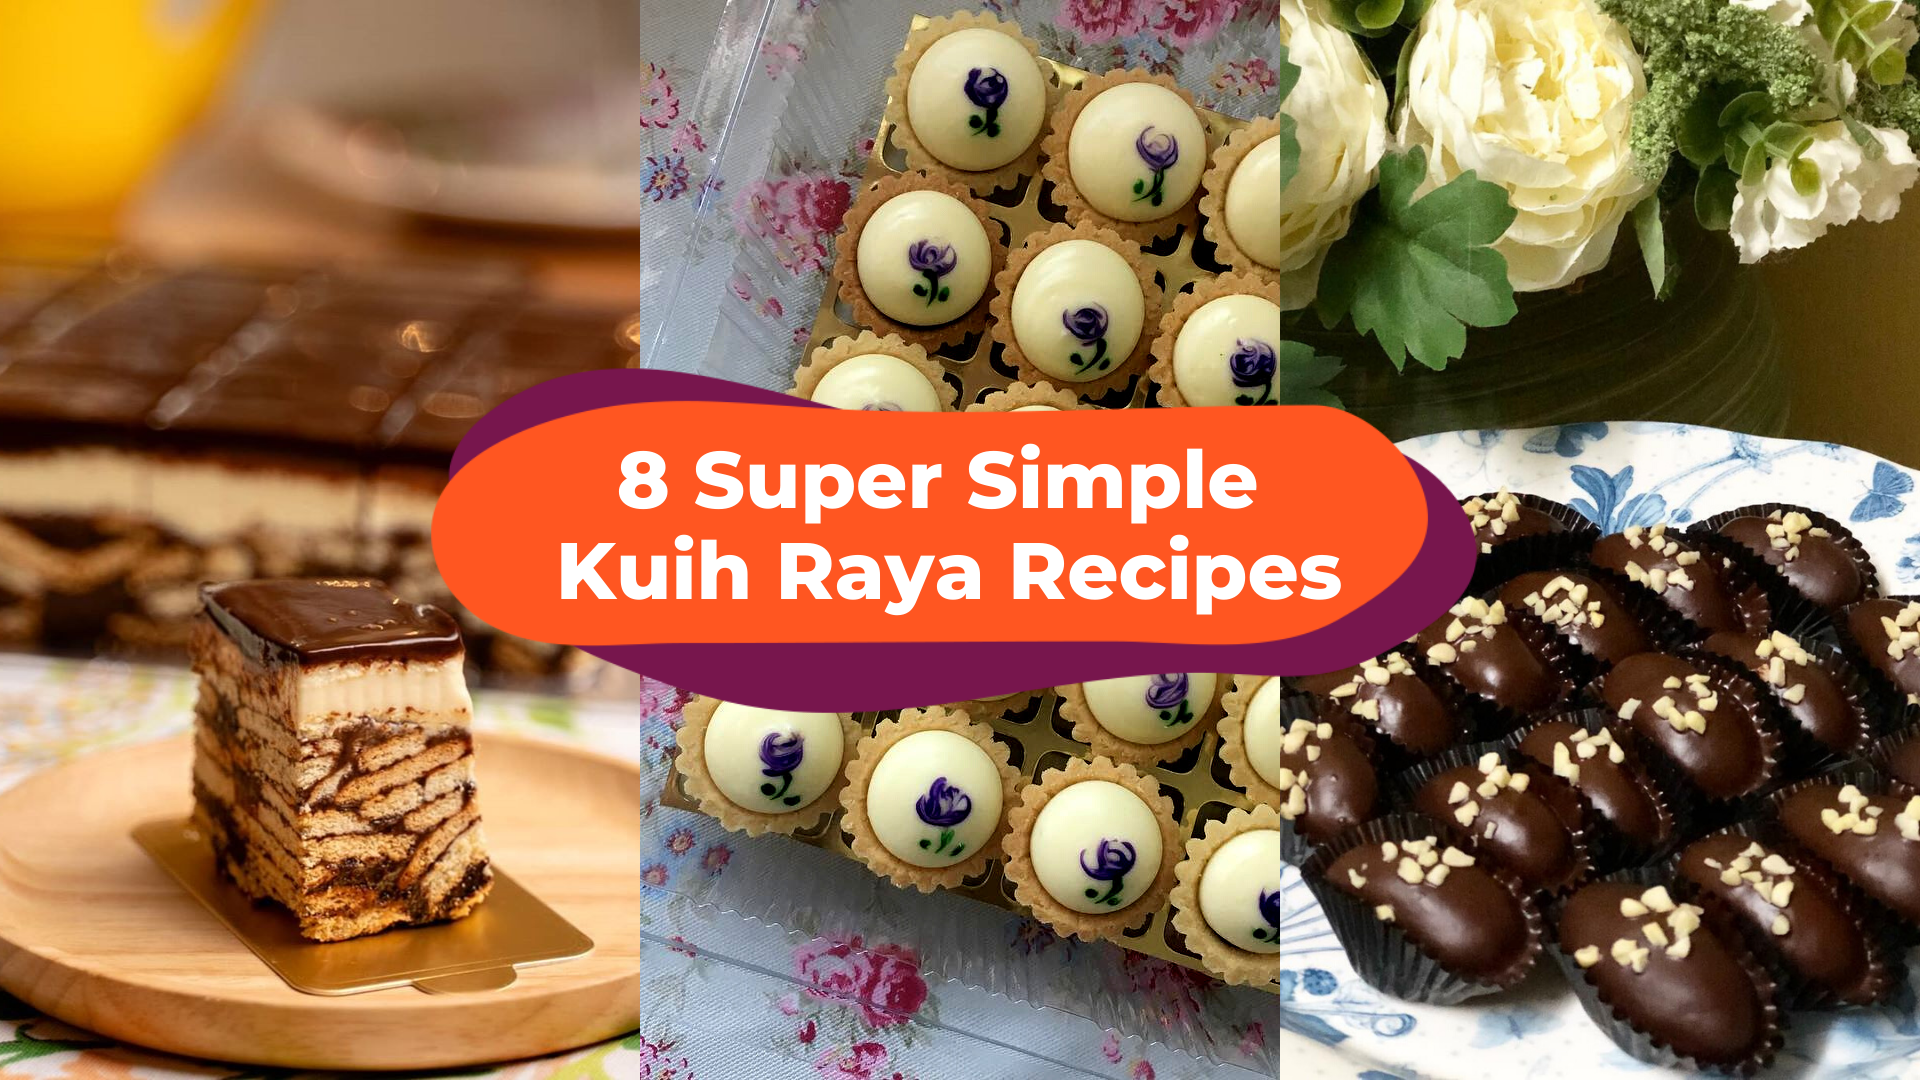 8 Easy Kuih Raya Recipes No Complicated Ingredients Or Equiment